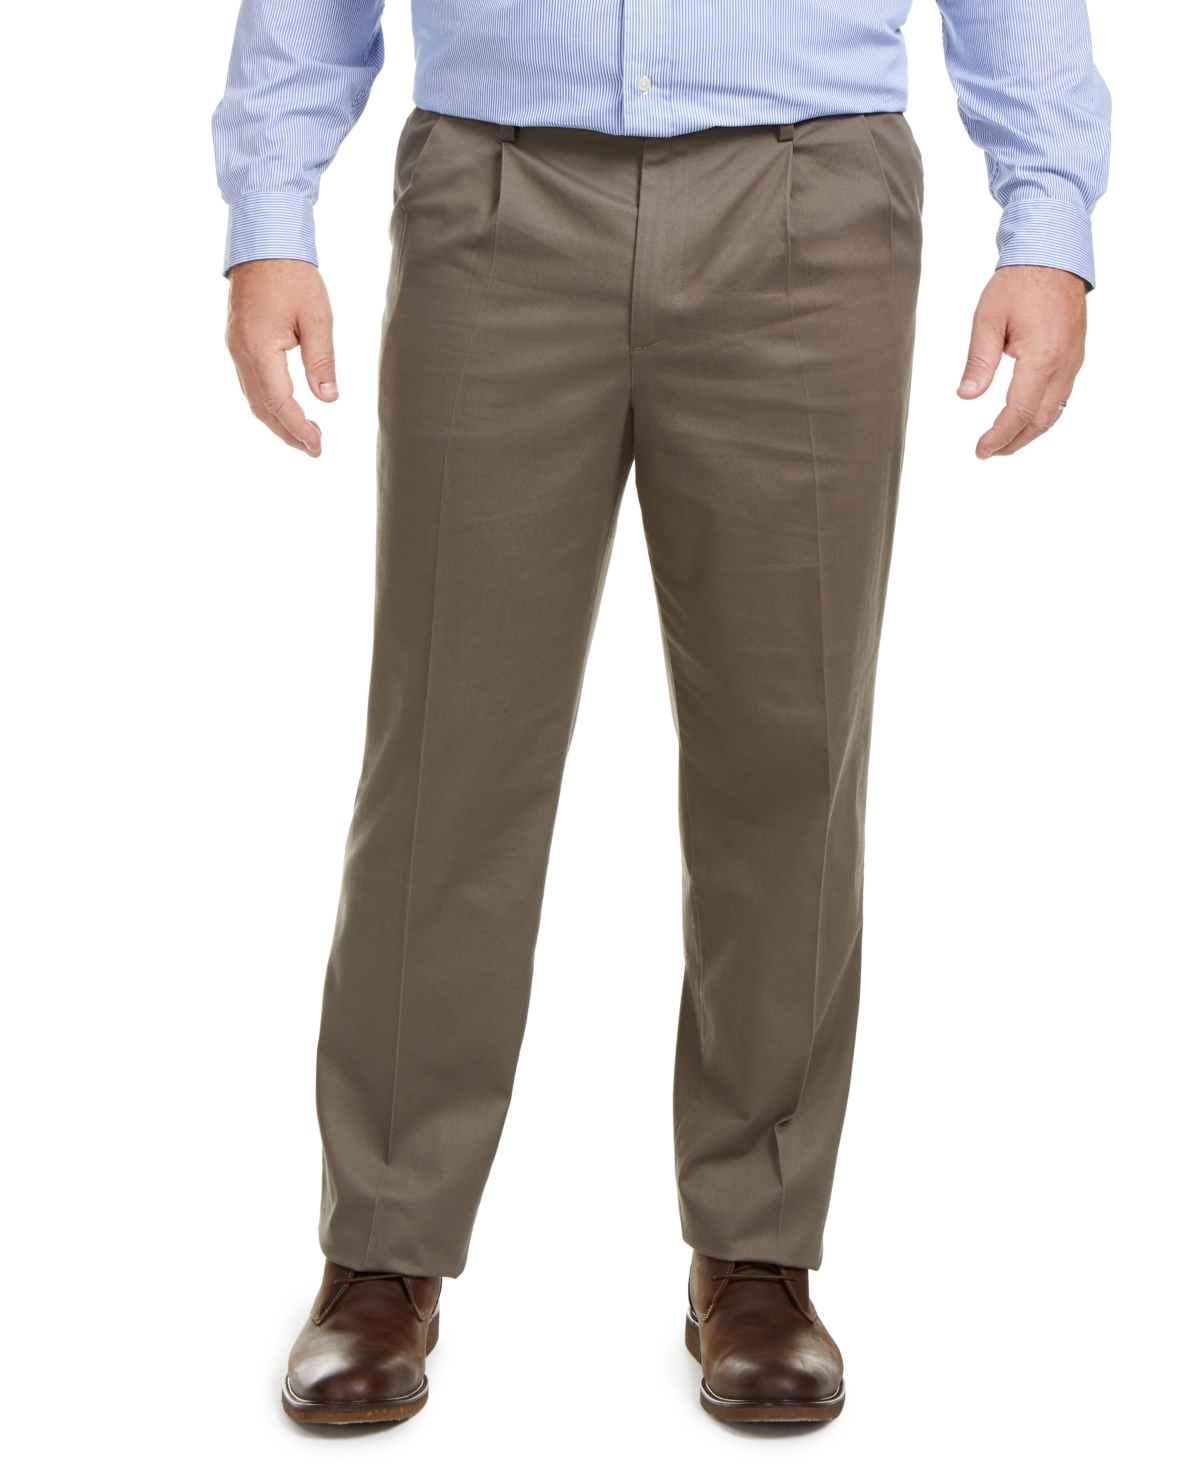 Men's Big & Tall Signature Lux Cotton Classic Fit Pleated Creased Stretch Khaki Pants - Med Brown